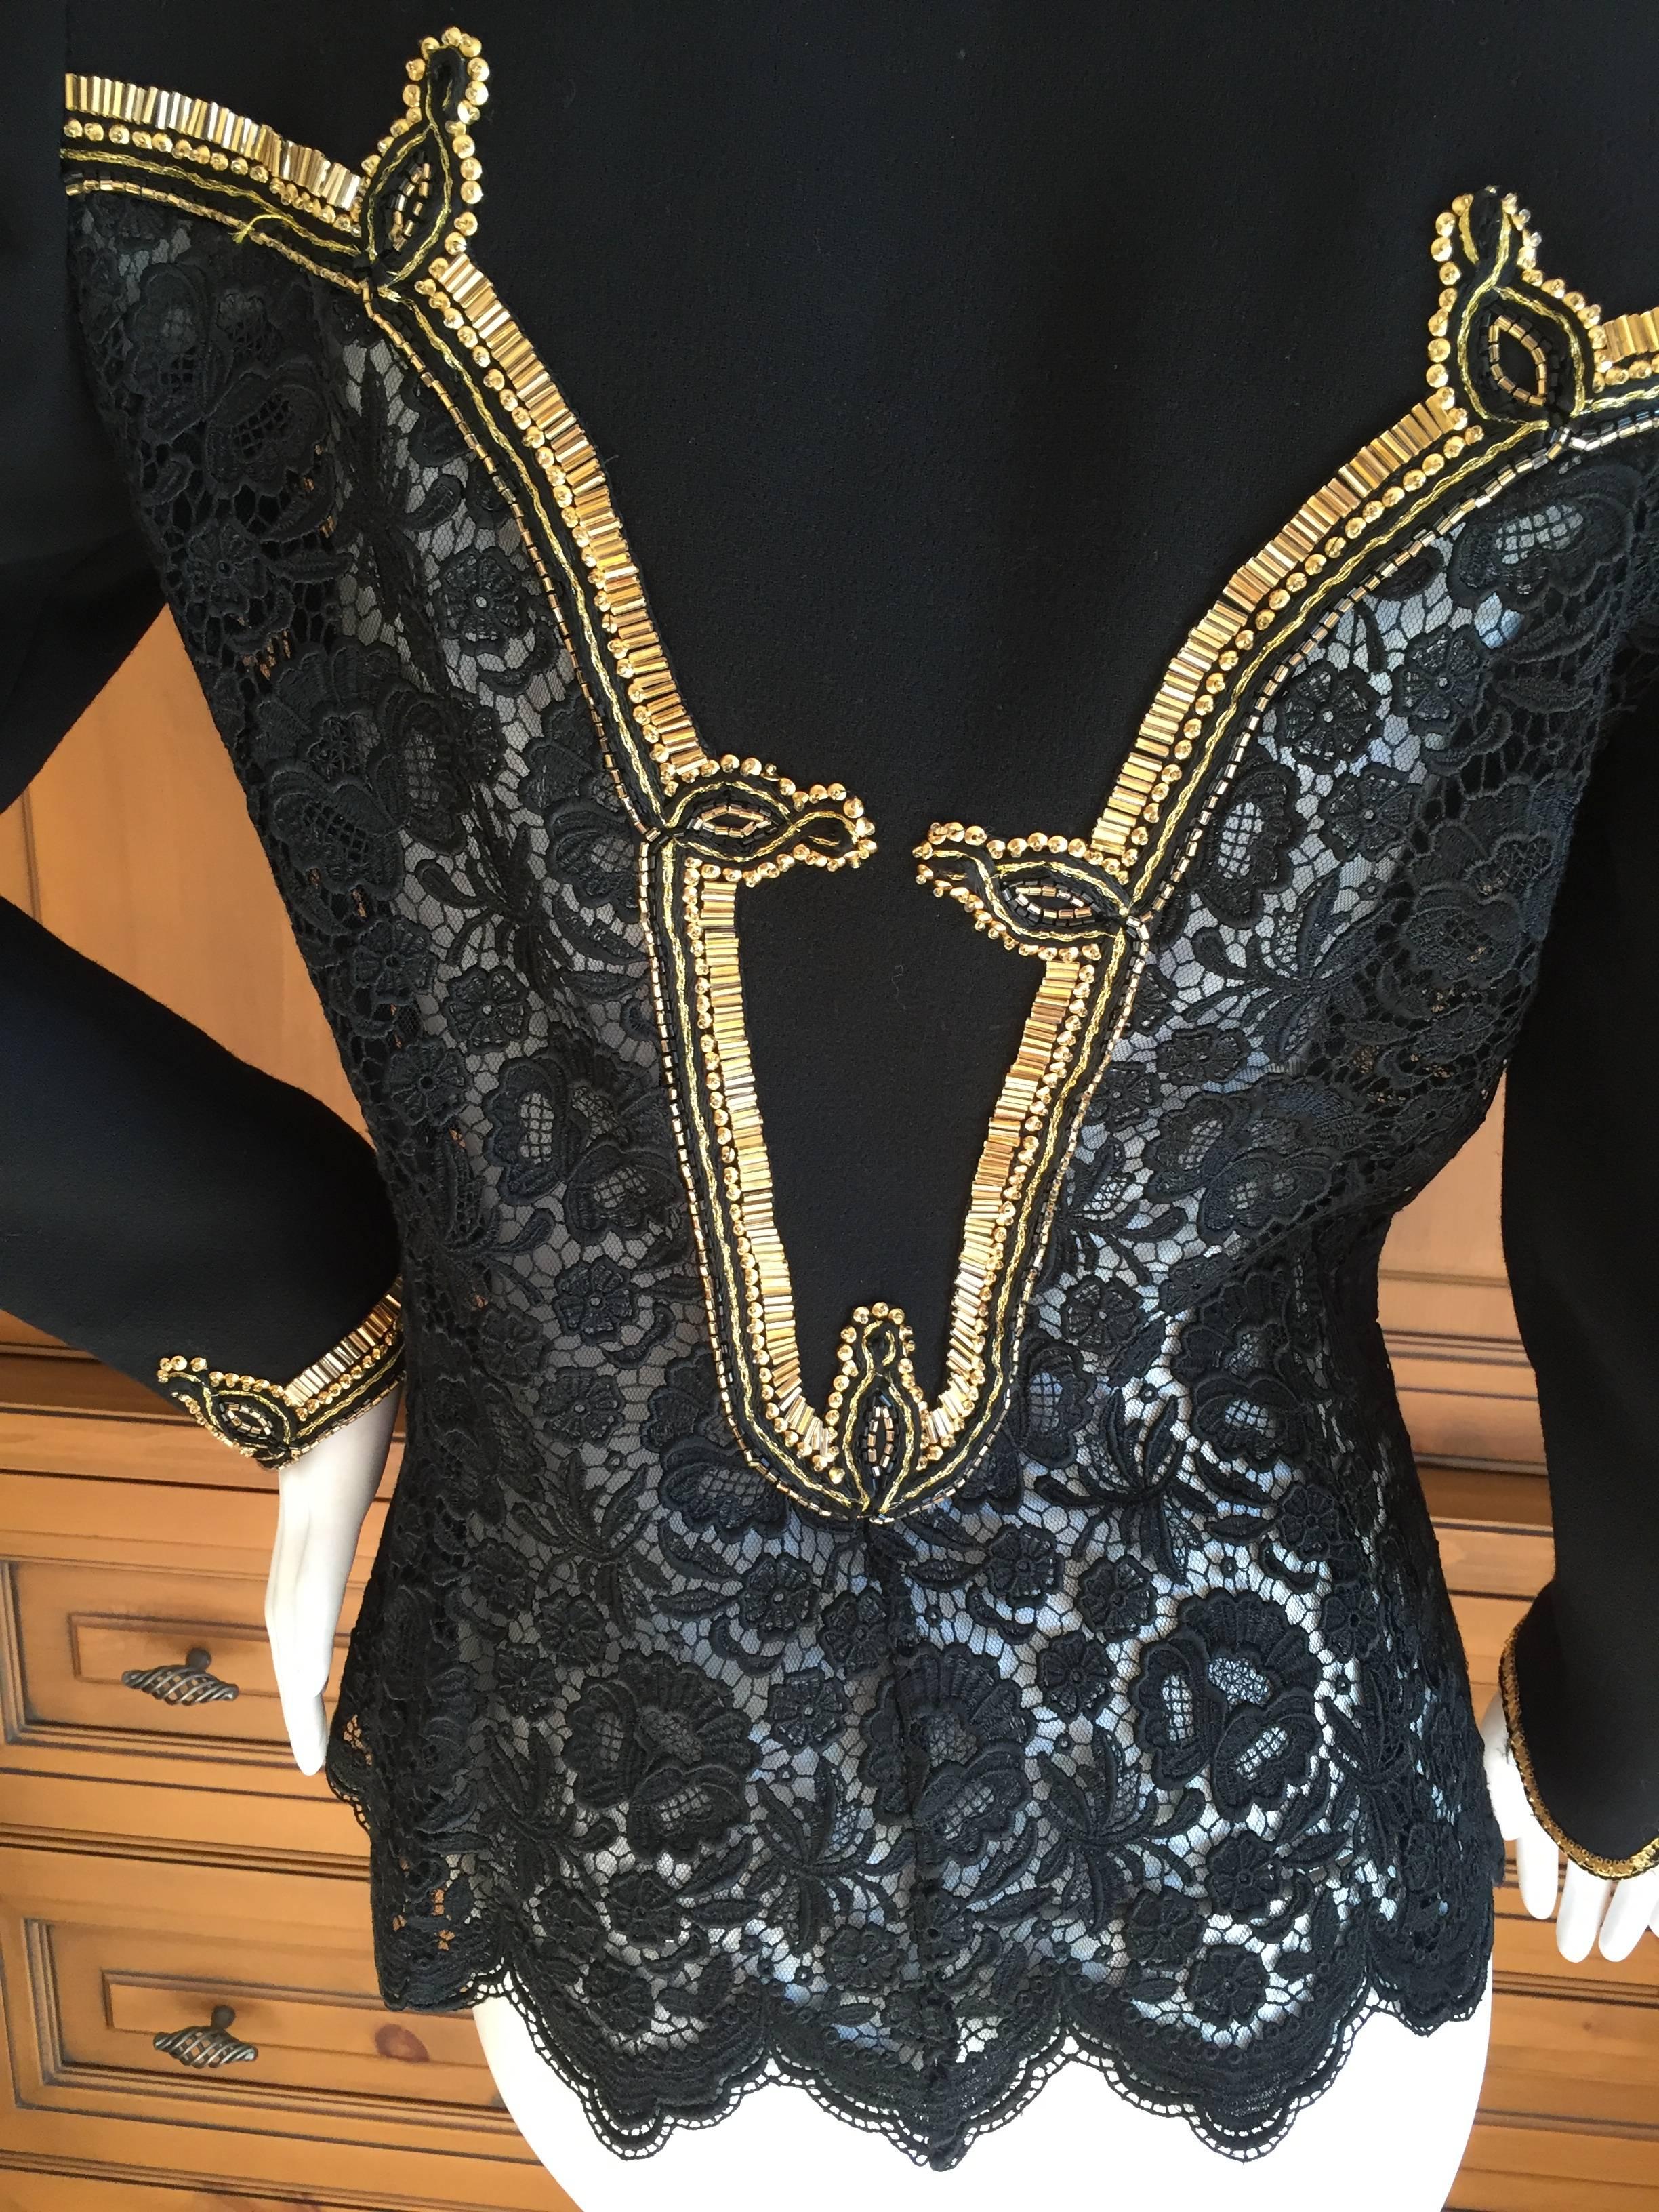 Gianni Versace Couture 1992 Beaded Black Lace Jacket For Sale 2